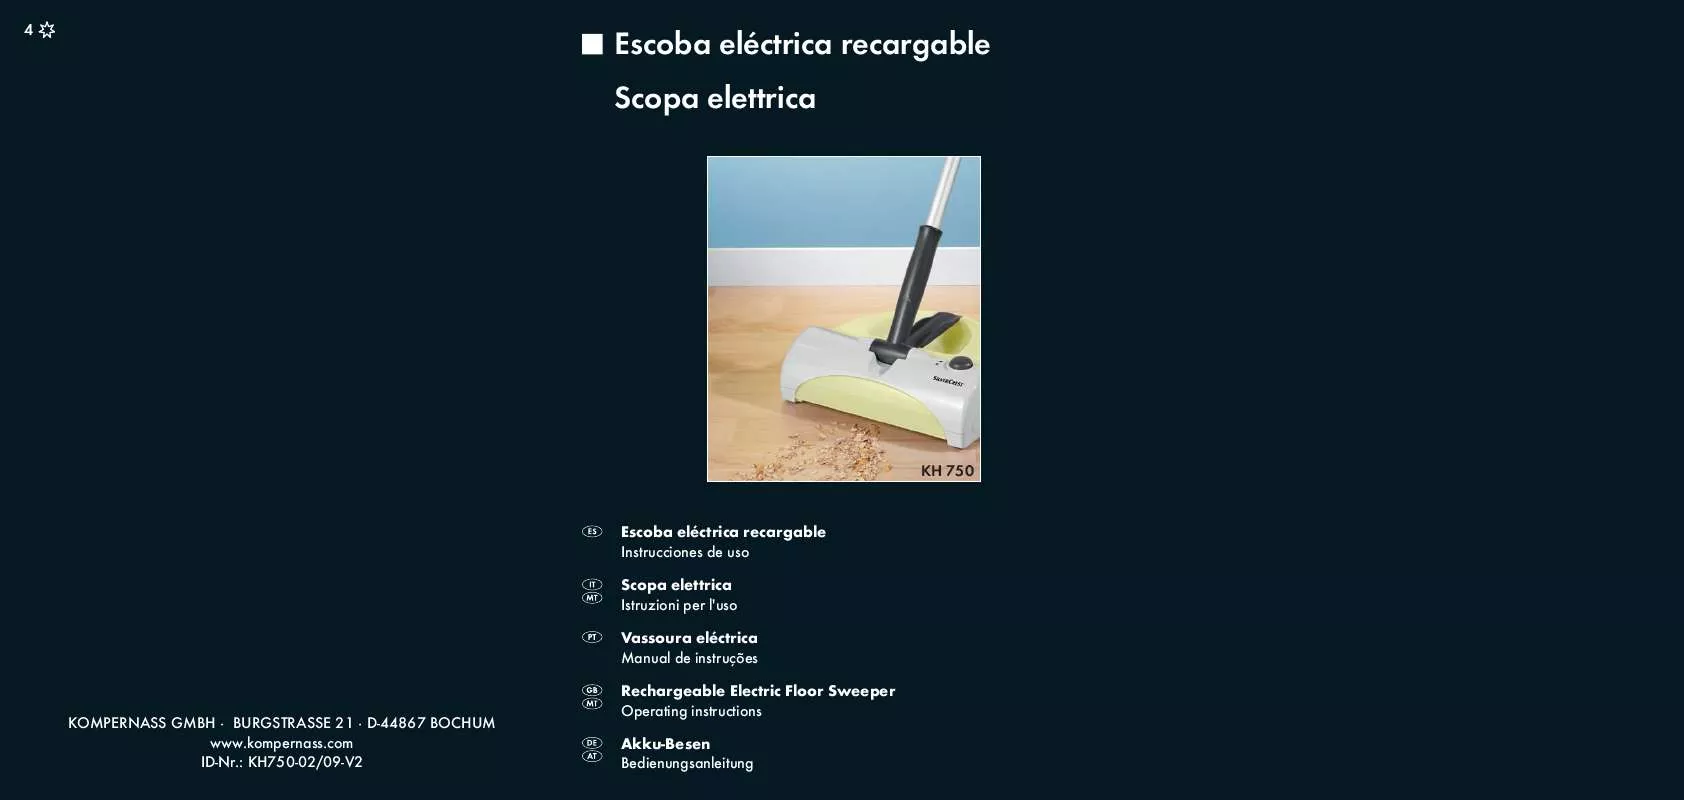 Mode d'emploi SILVERCREST KH 750 RECHARGEABLE ELECTRIC FLOOR SWEEPER